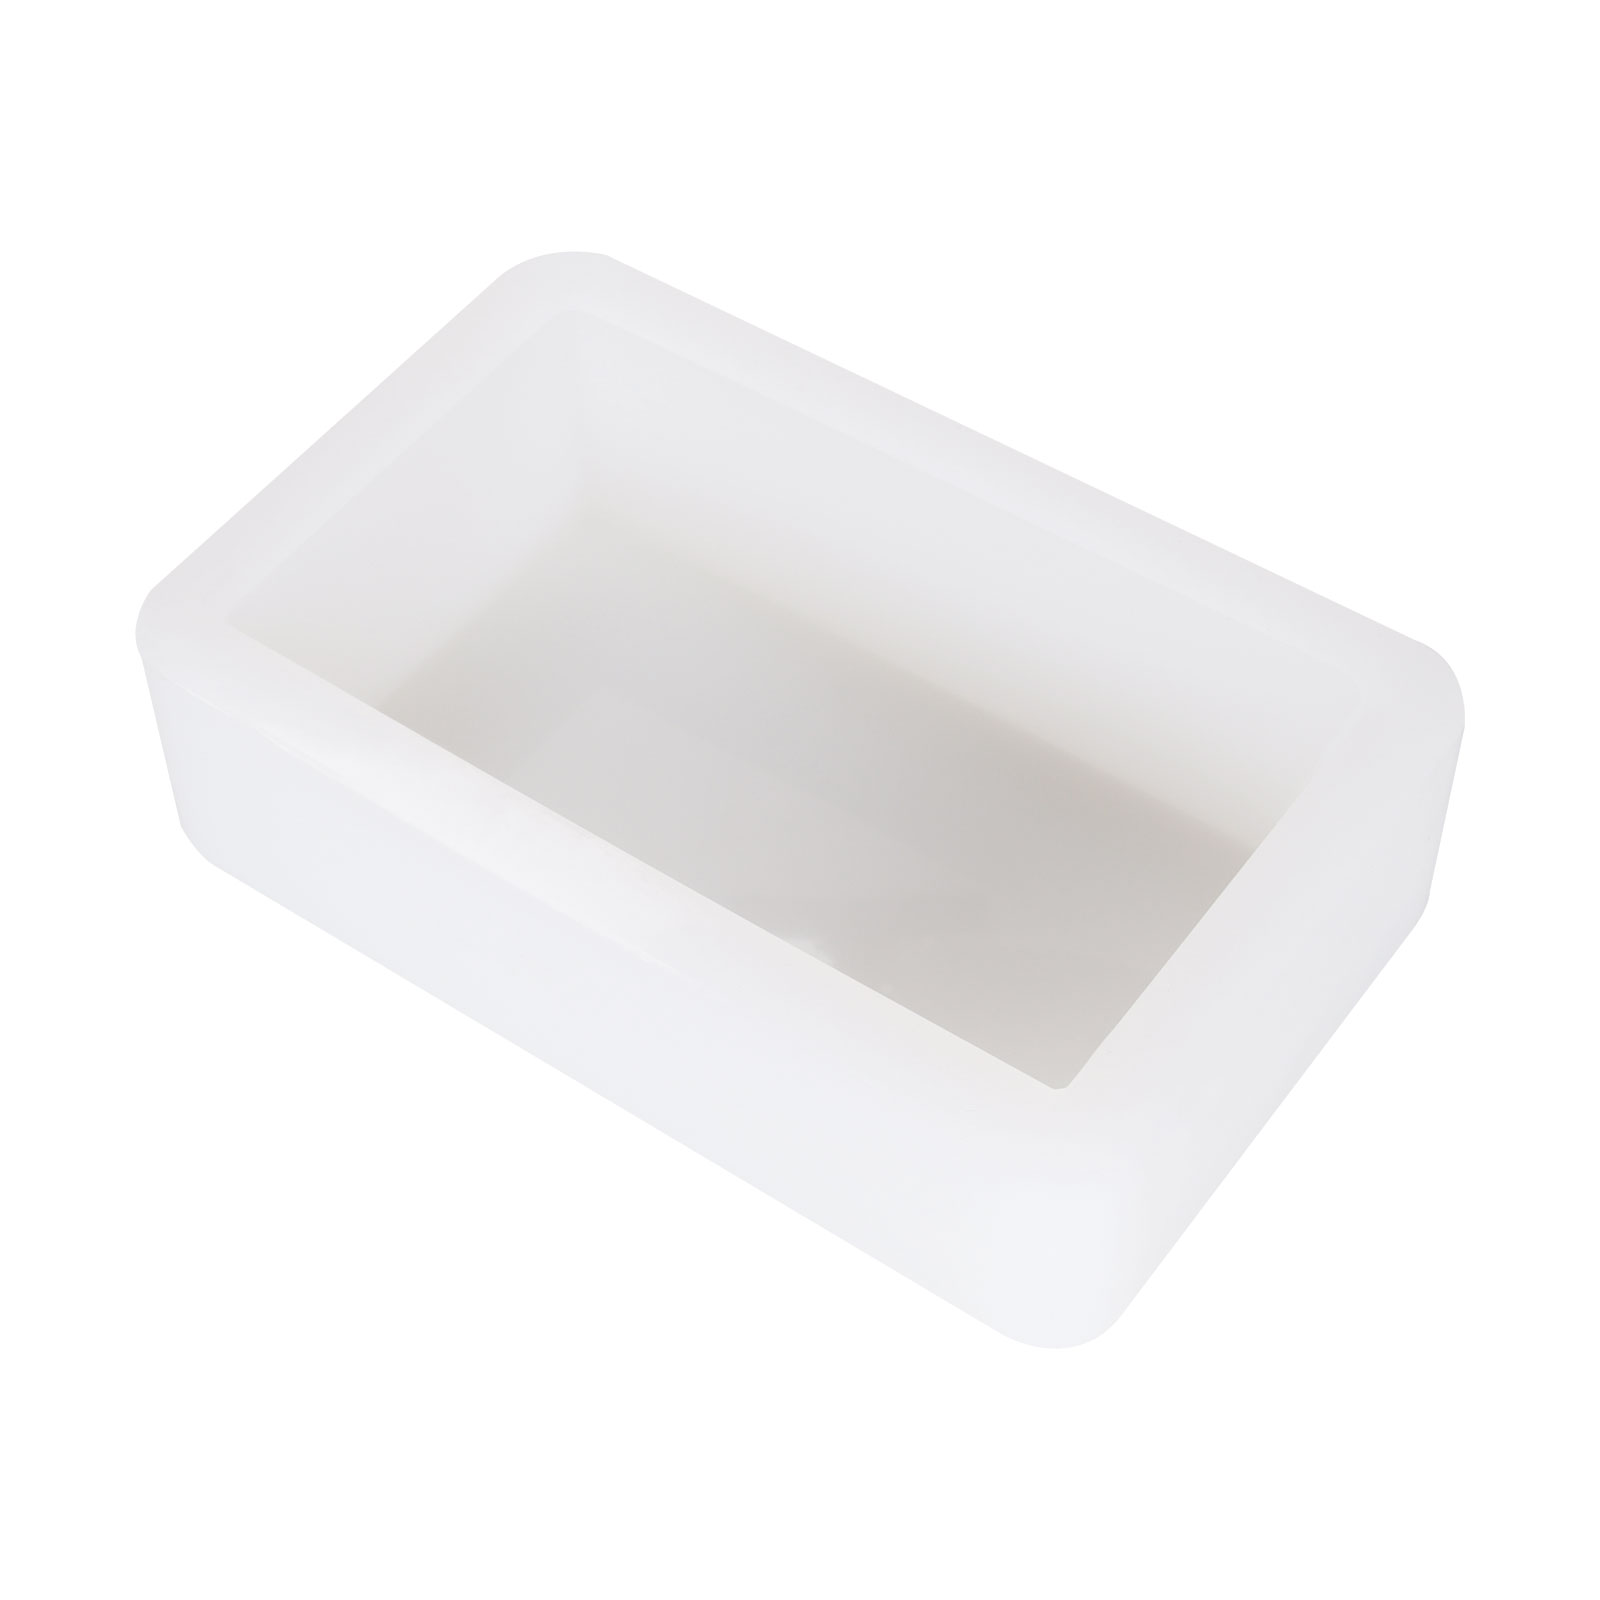 Hot Sale 19x12x5.5cm Thick Rectangular Silicone Mold For Epoxy Resin